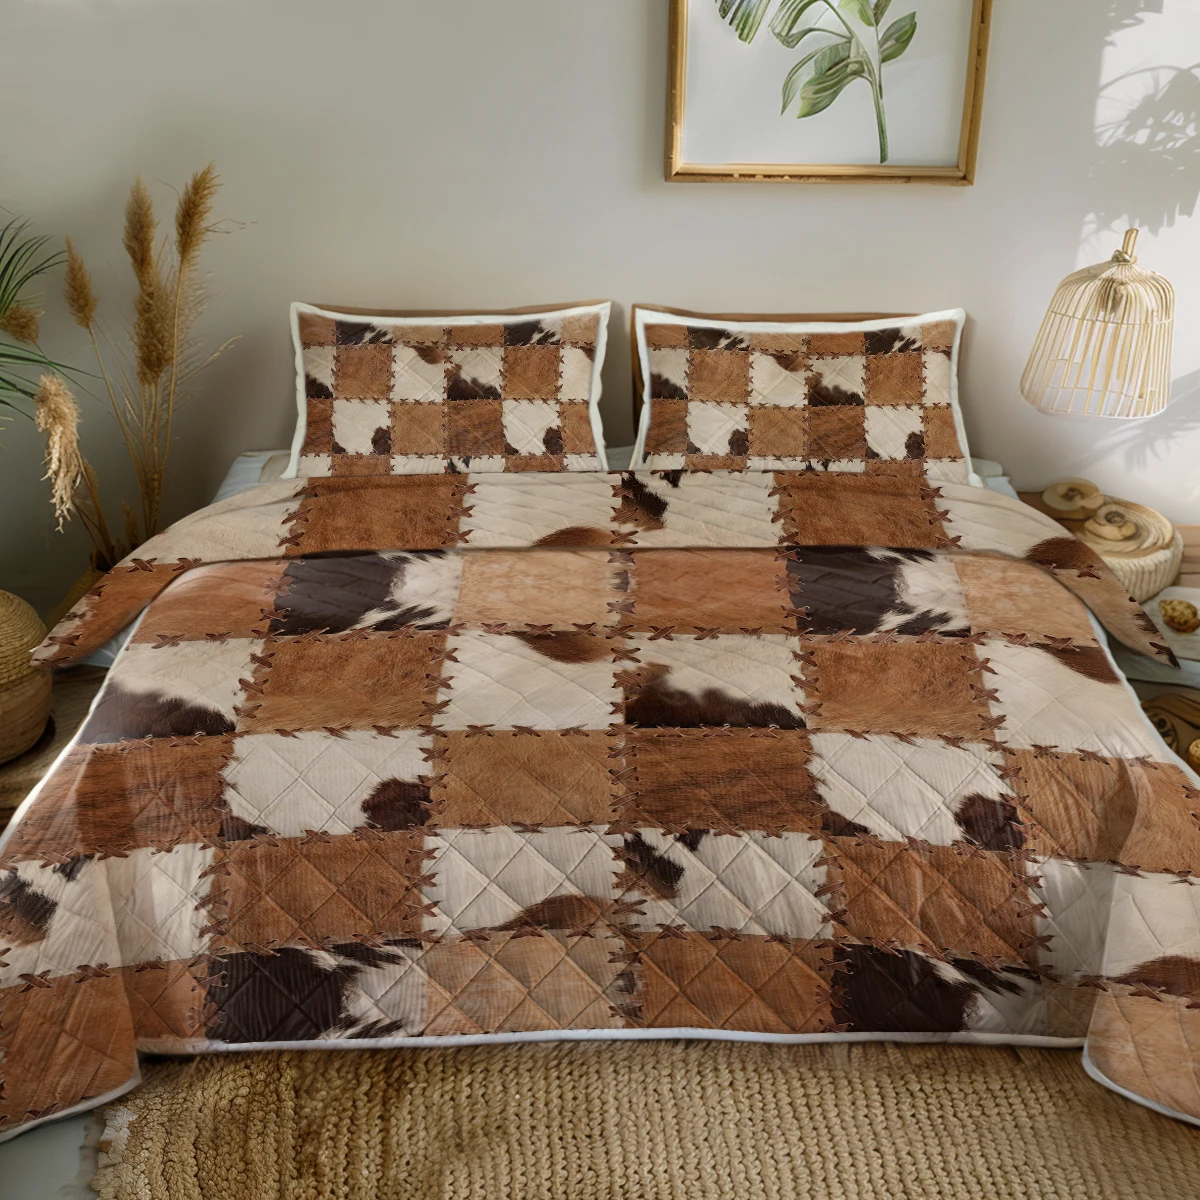 

3 Piece Fur-like Patchwork Bedding Set for Kids Boys Girls Teens Cowboy Farmhouse Bedding Set 1 Coverlet and 2 Pillowcases